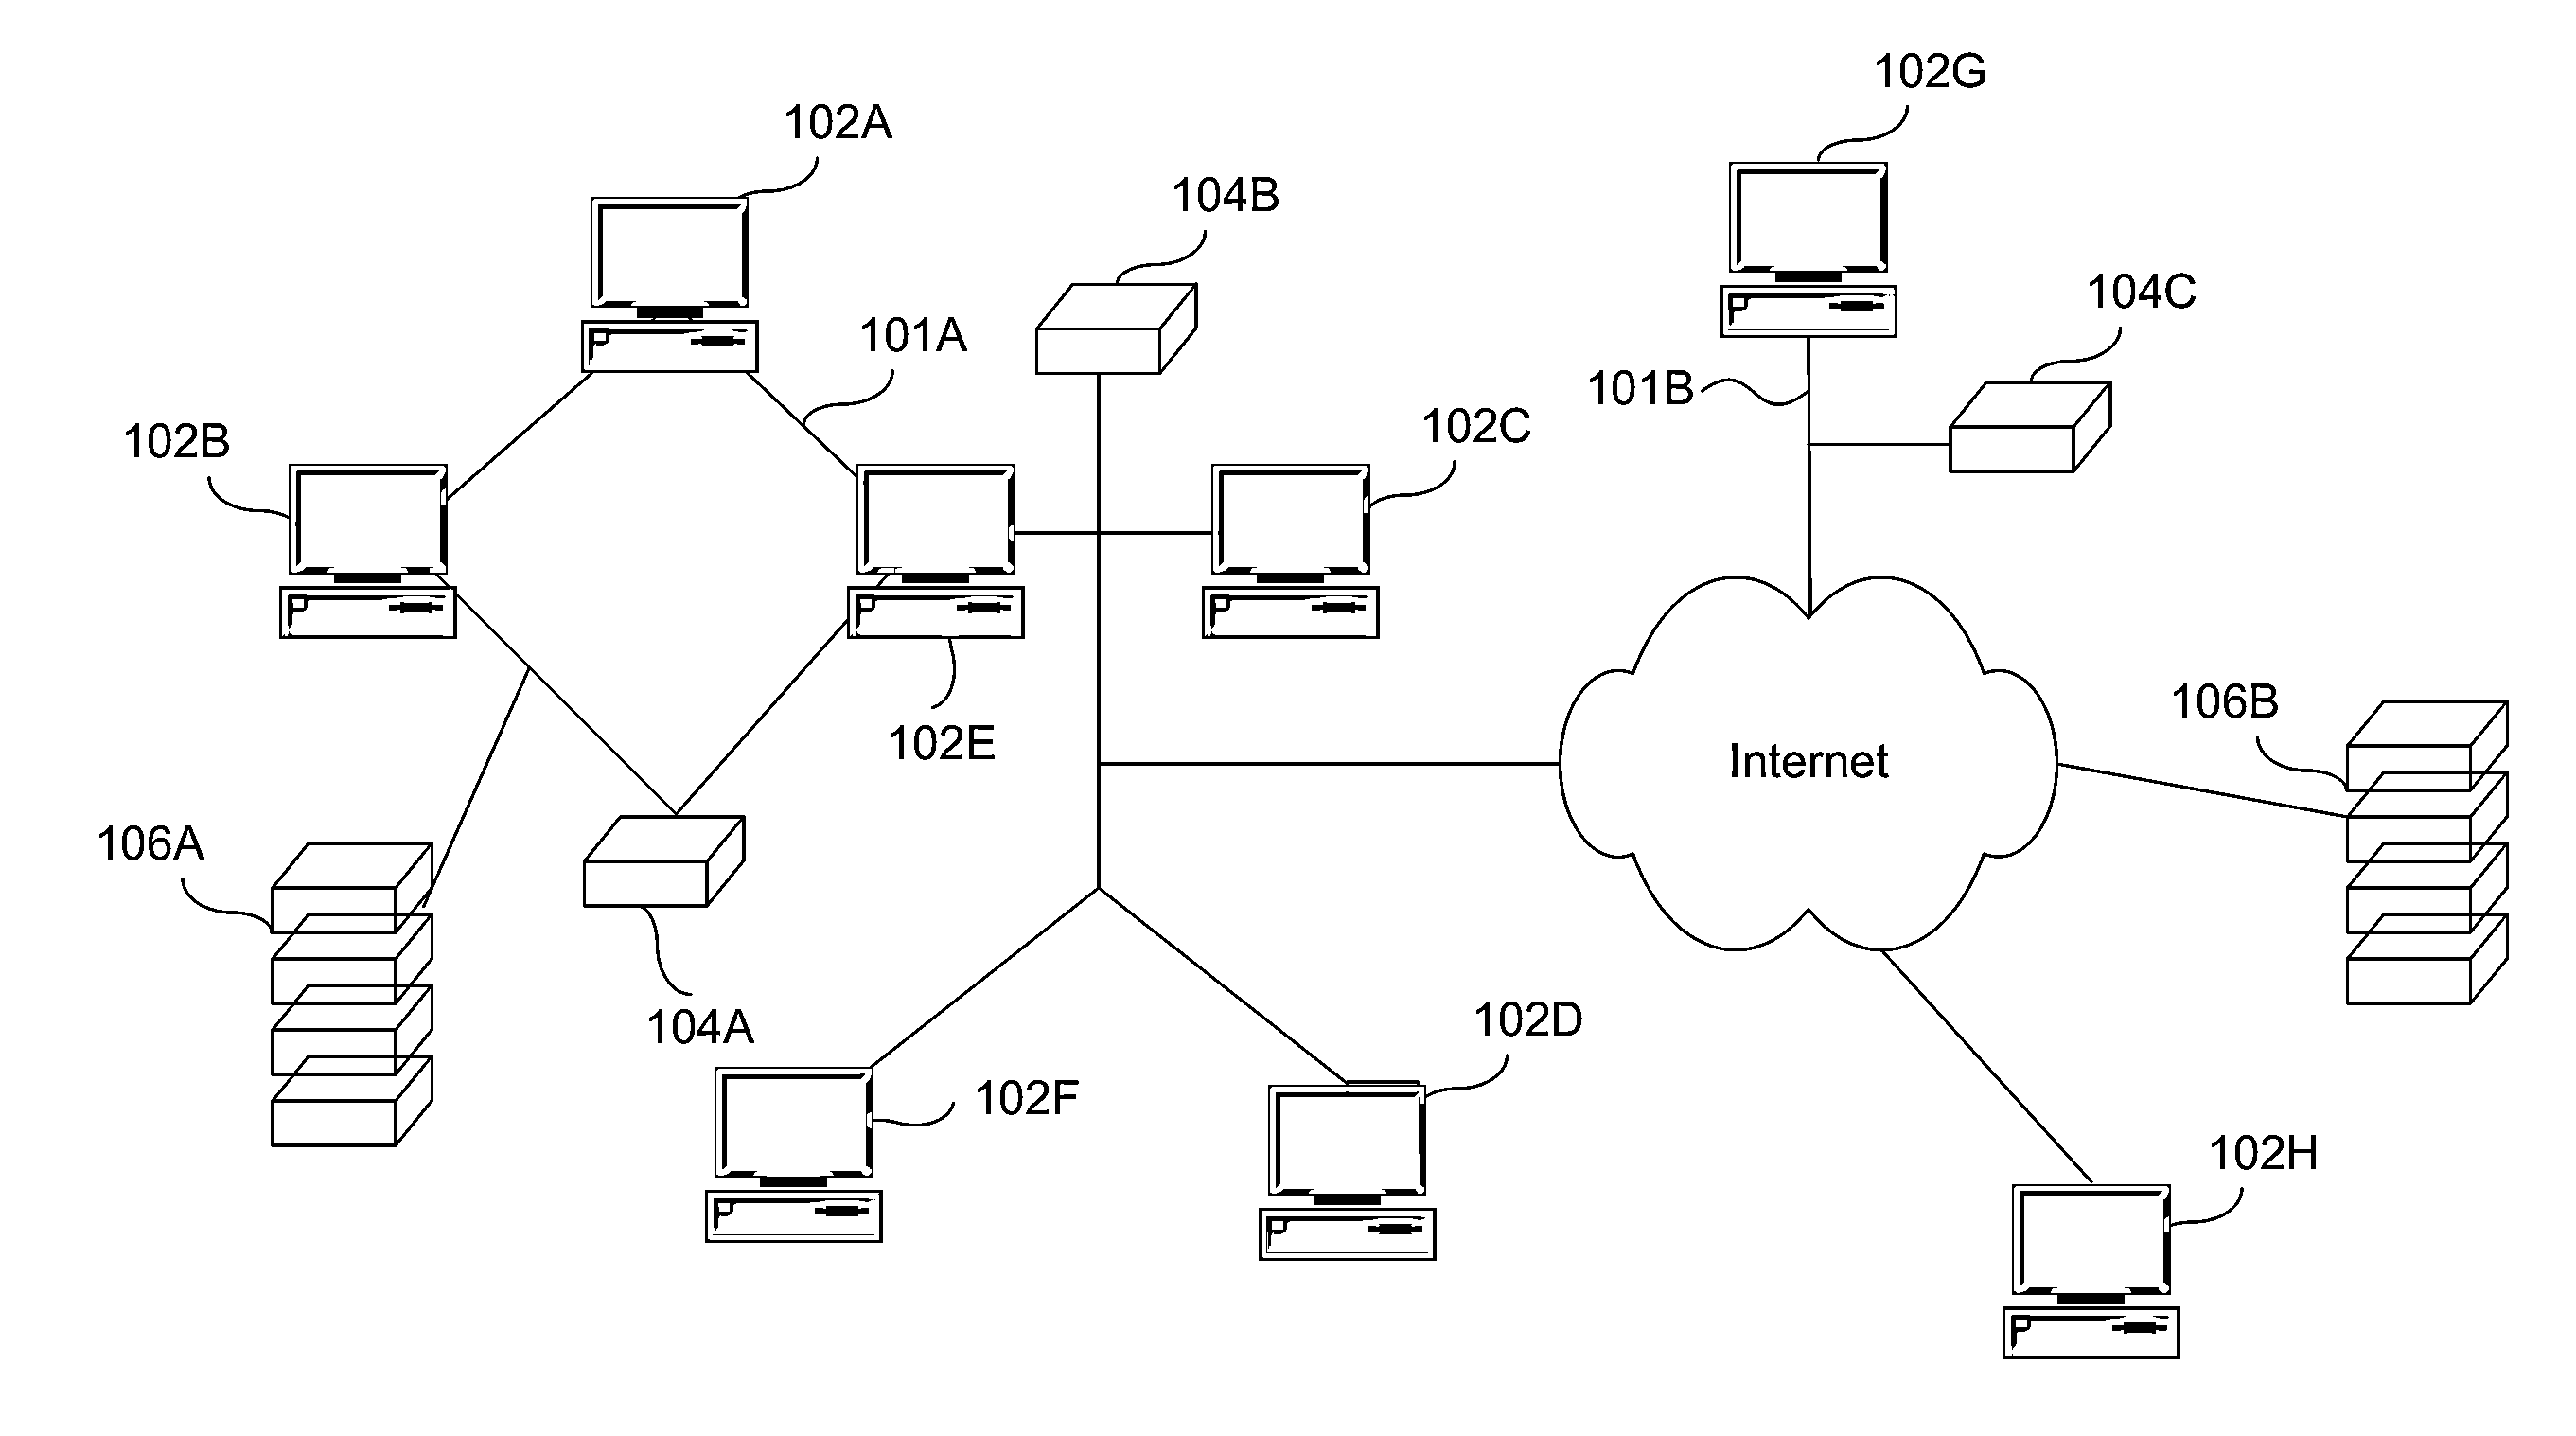 System and method for bare metal restore of a computer over a network